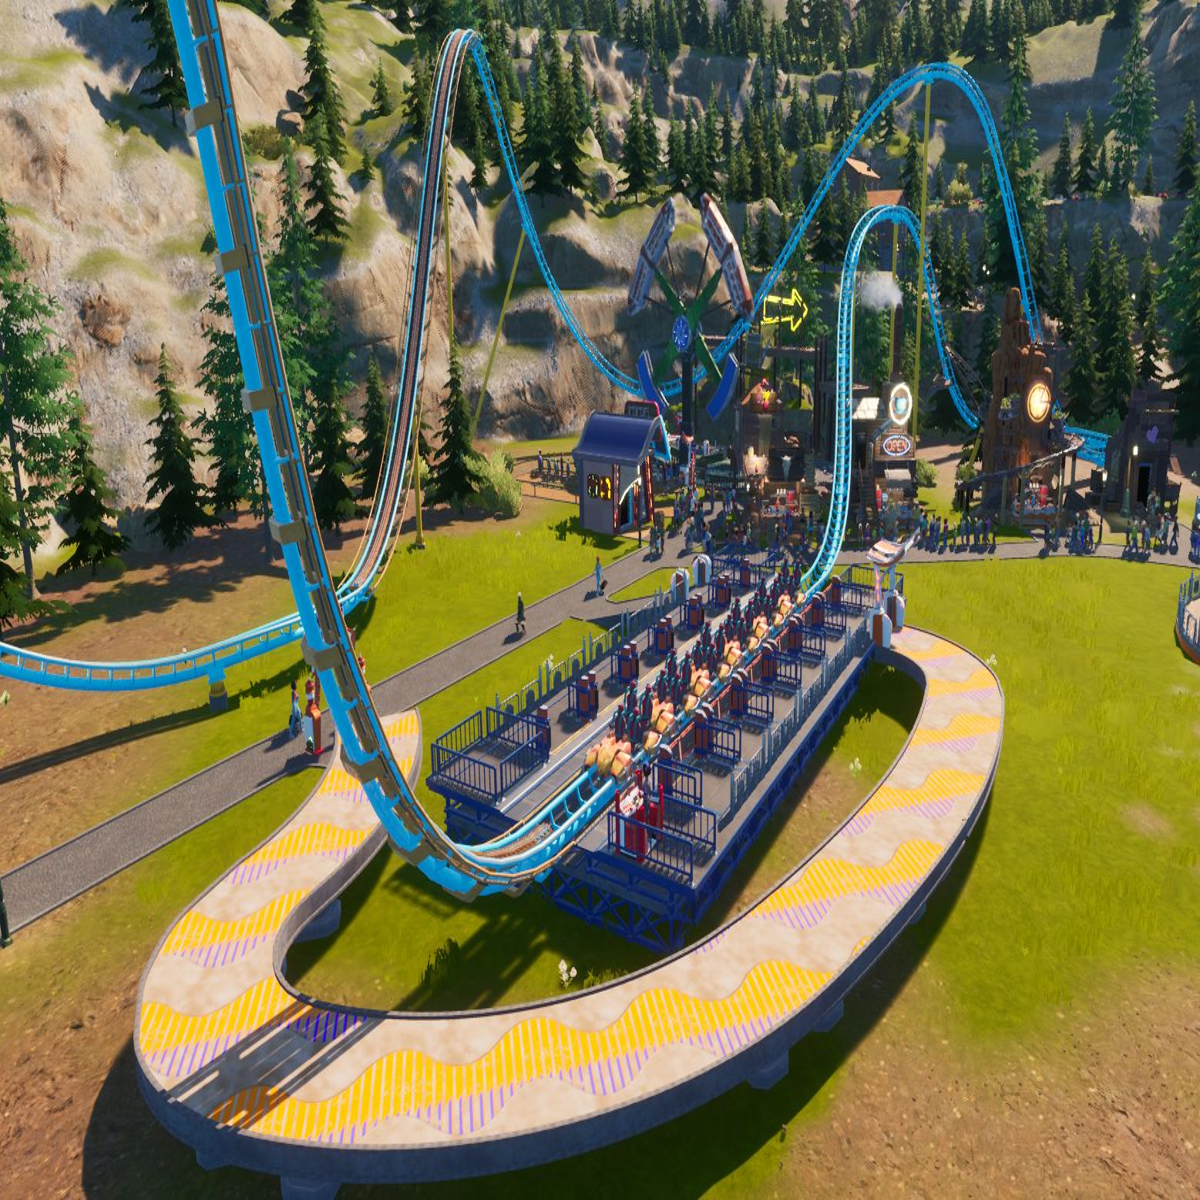 Park Beyond is a theme park sim with the best and weirdest rides